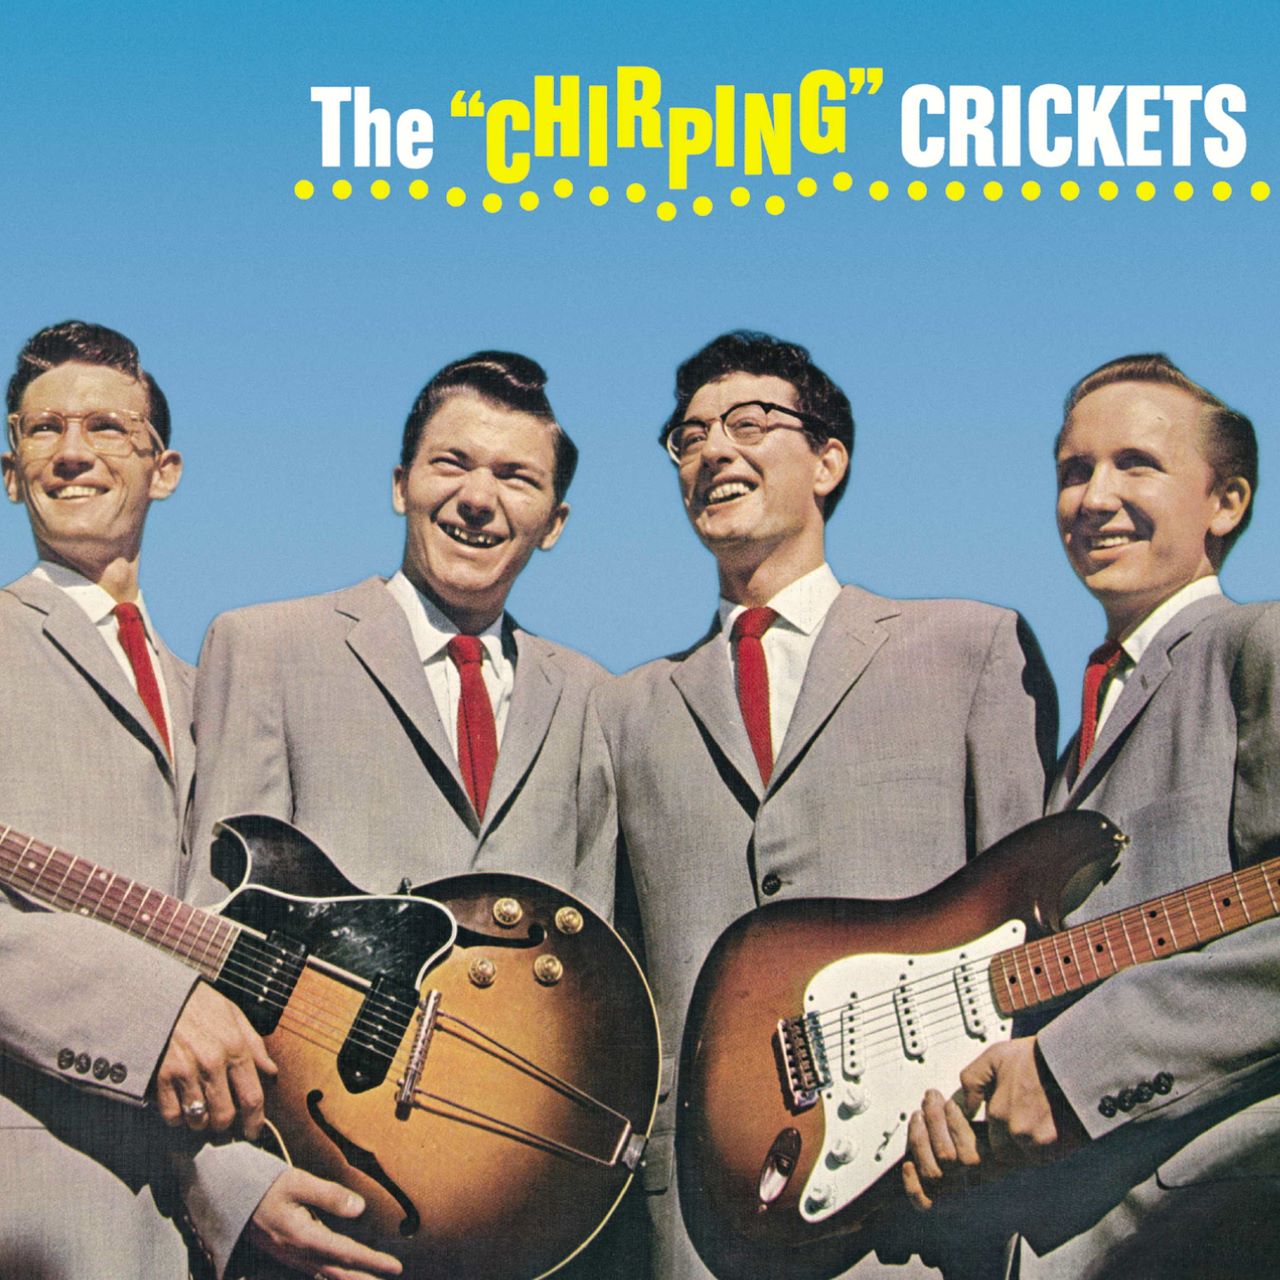 Buddy Holly - The Chirping Crickets cover album